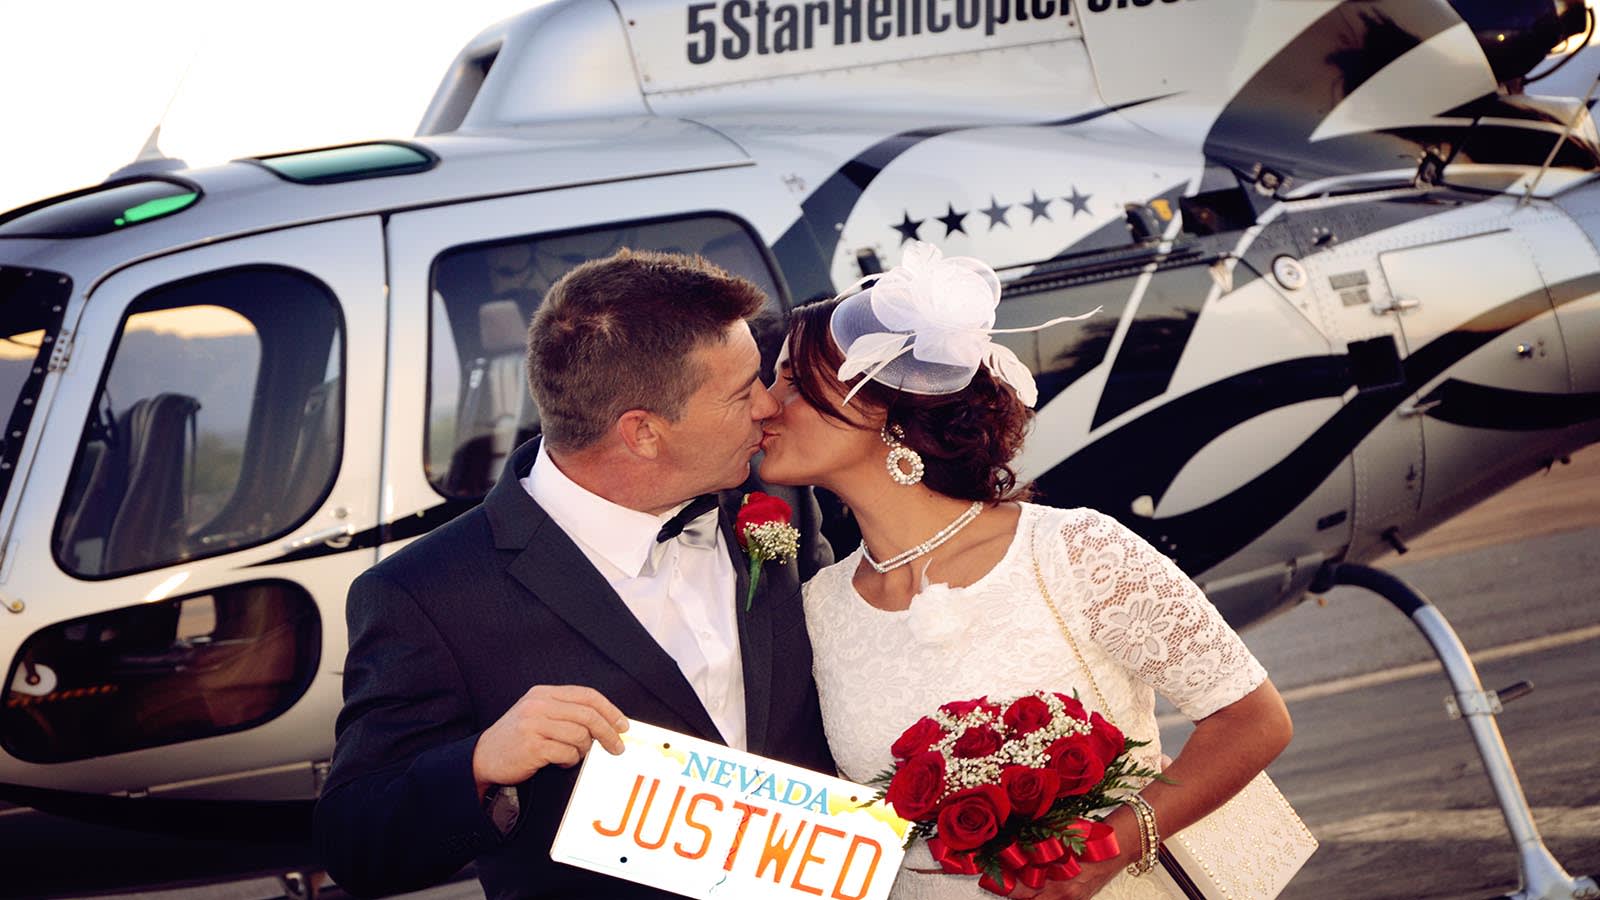 Looking for an affordable Las Vegas helicopter night Strip wedding ceremony without breaking your budget?